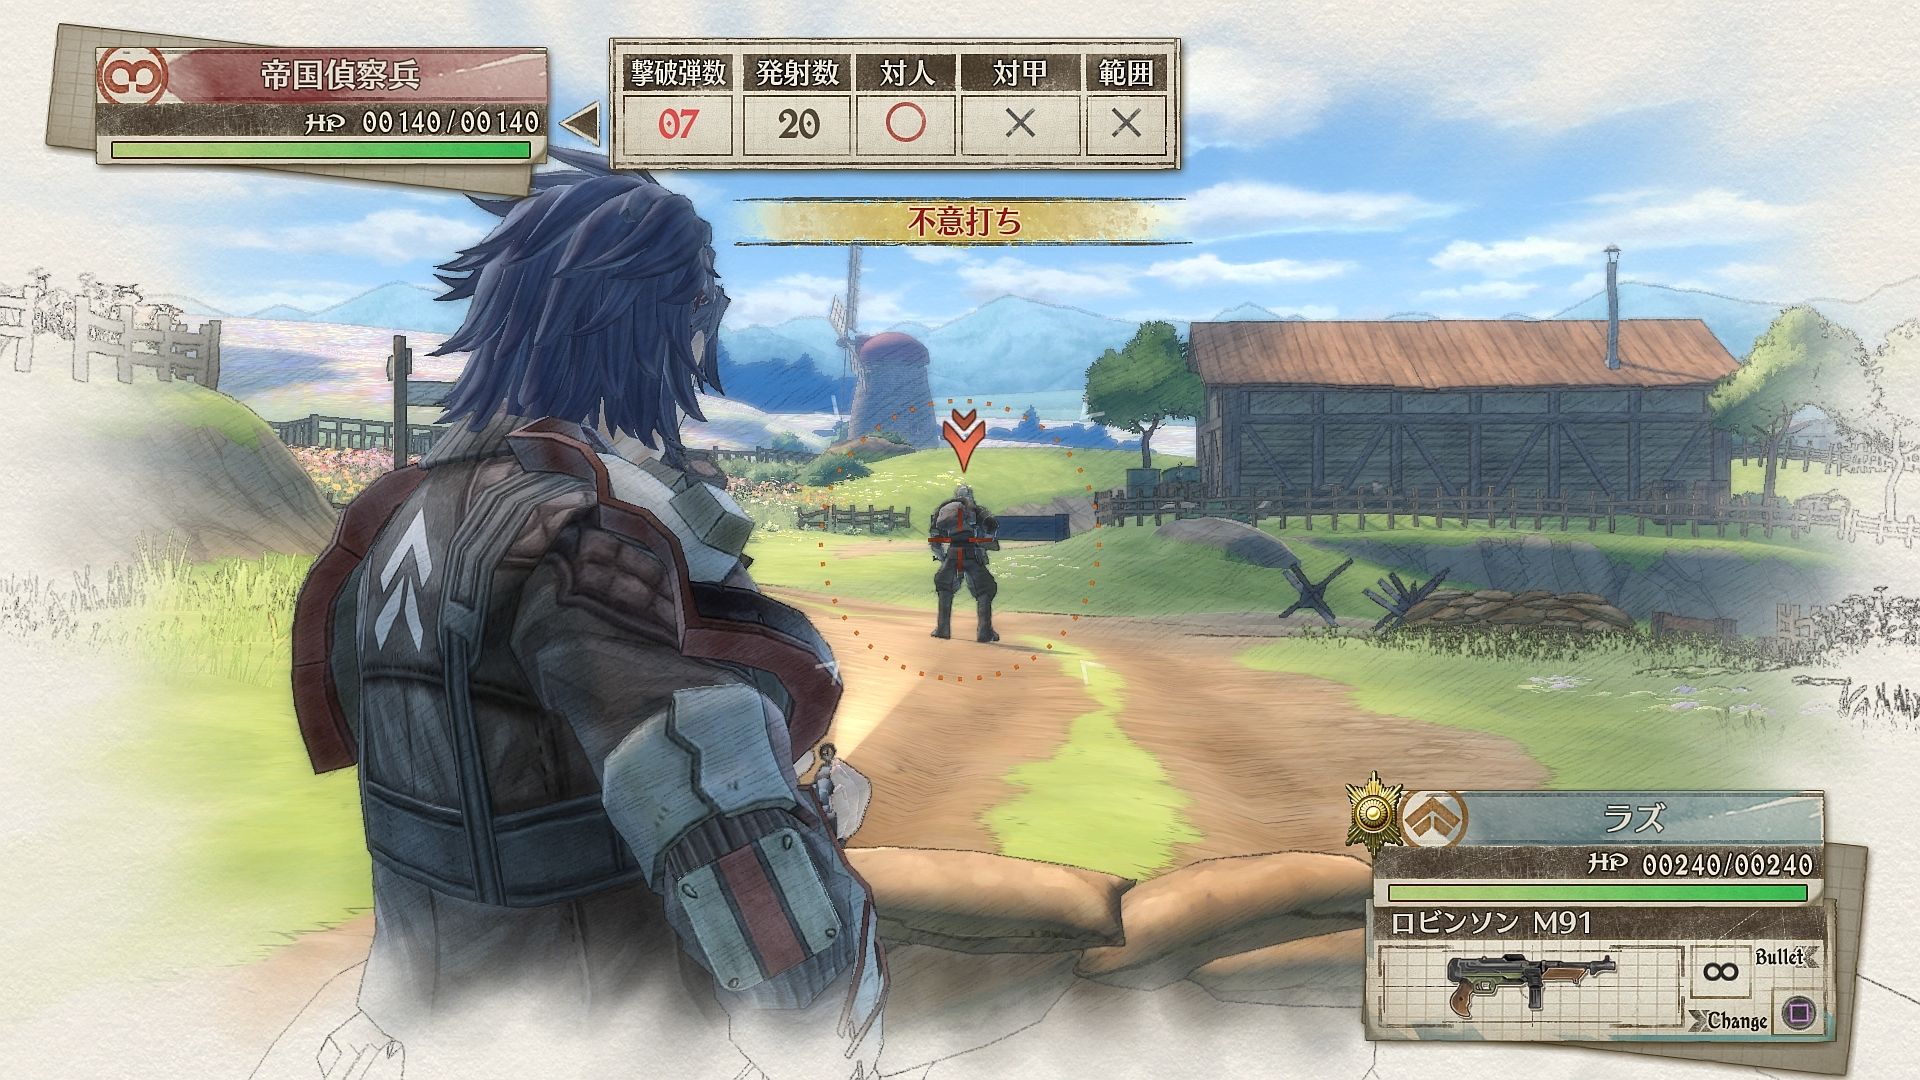 http://www.perfectly-nintendo.com/wp-content/gallery/valkyria-chronicles-4-27-12-2017/28.jpg